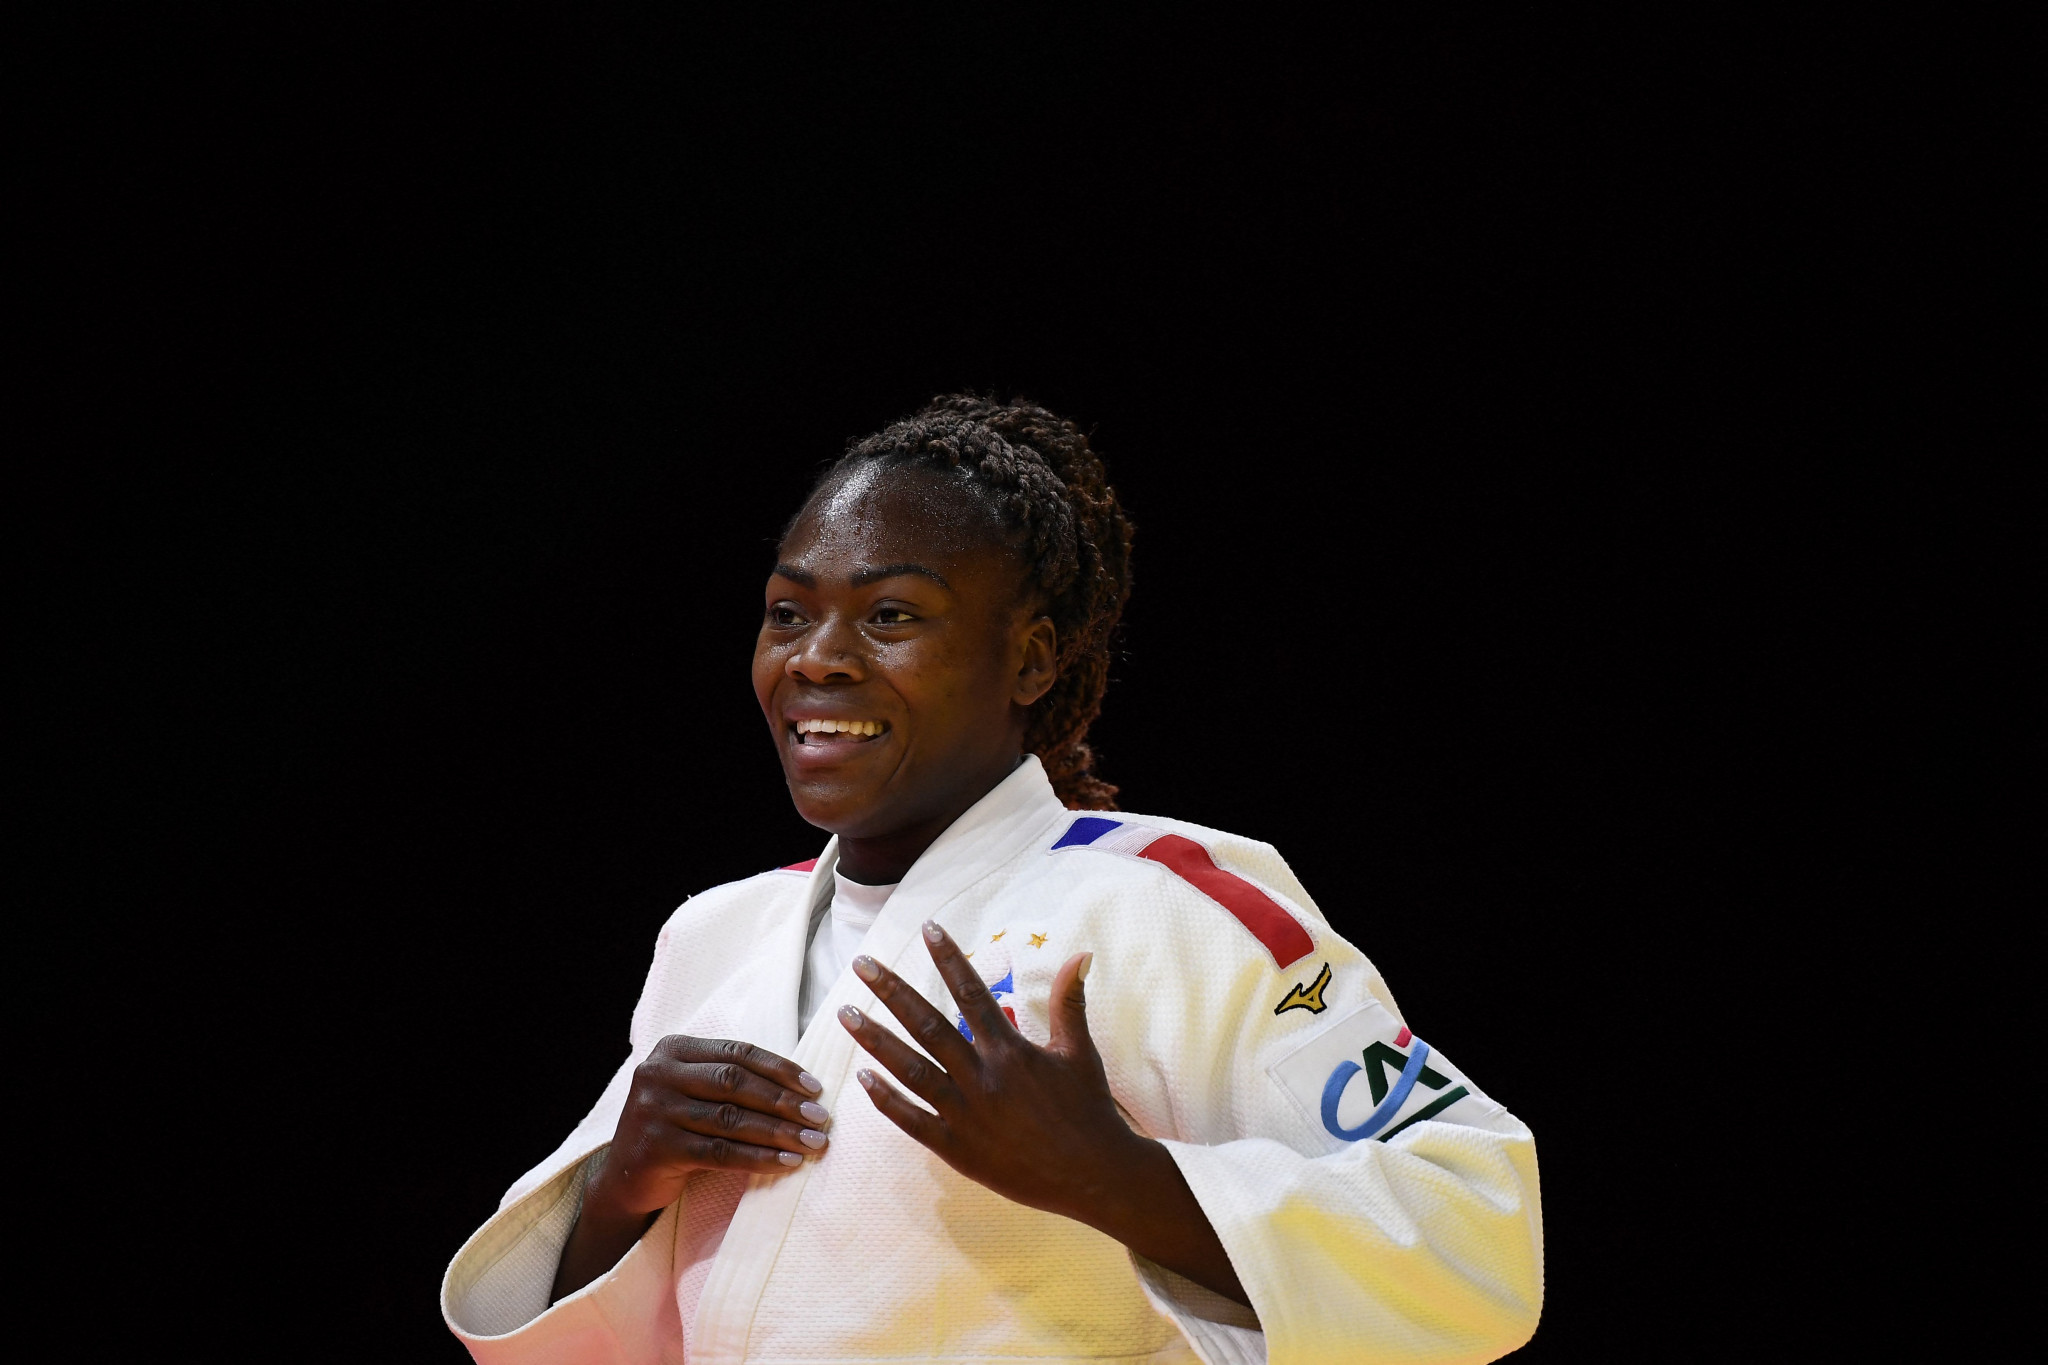 France's Clarisse Agbegnenou was among the winners in a Mizuno judogi at the recent World Championships ©Getty Images